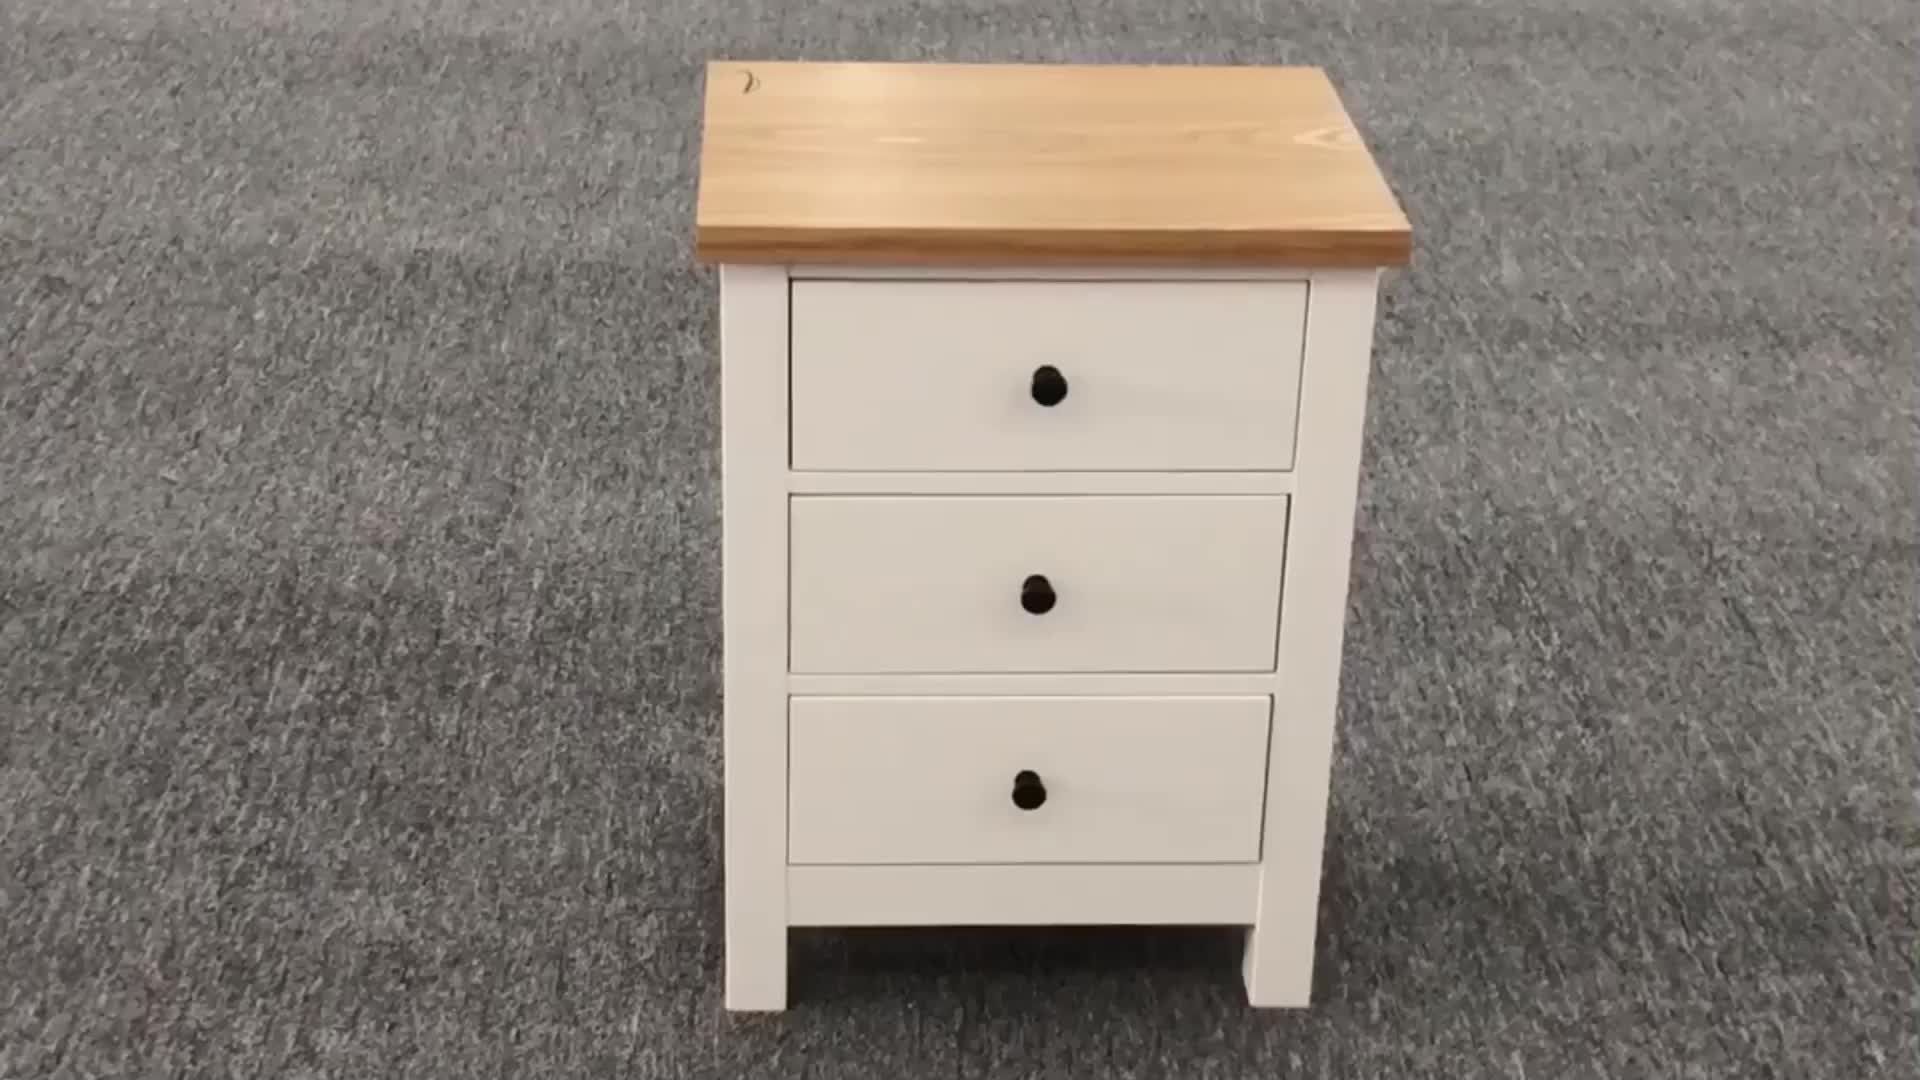 3 Drawer White Solid Wooden Bedside Table Small Modern Bed Side Tables Inside Recent Matte White 3 Drawer Wood Desks (View 12 of 15)